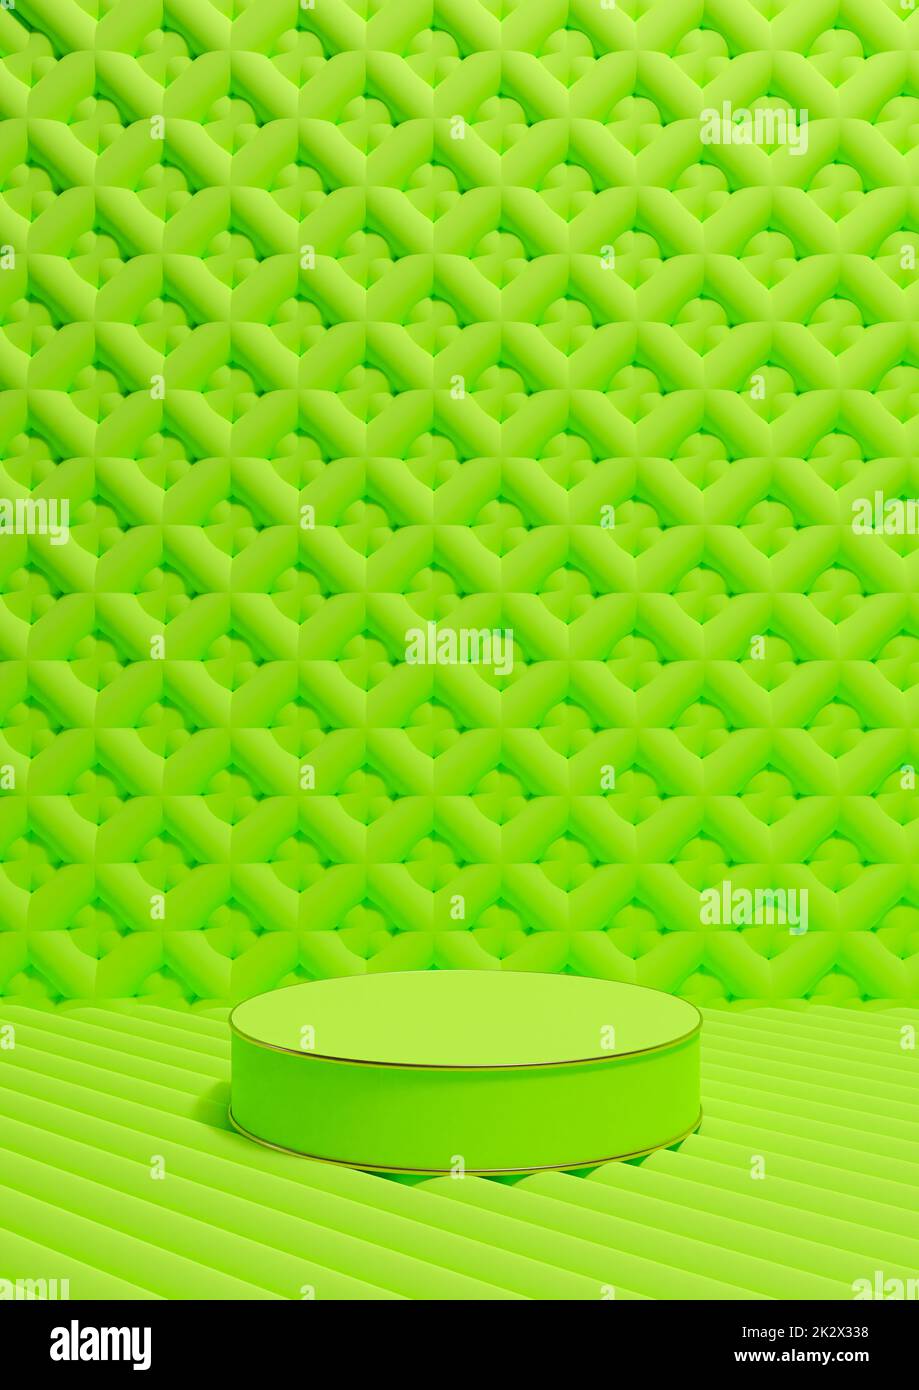 Bright, neon green 3D rendering luxury product display vertical product photography one cylinder podium stand golden line and ornament wallpaper or background simple, minimal composition Stock Photo